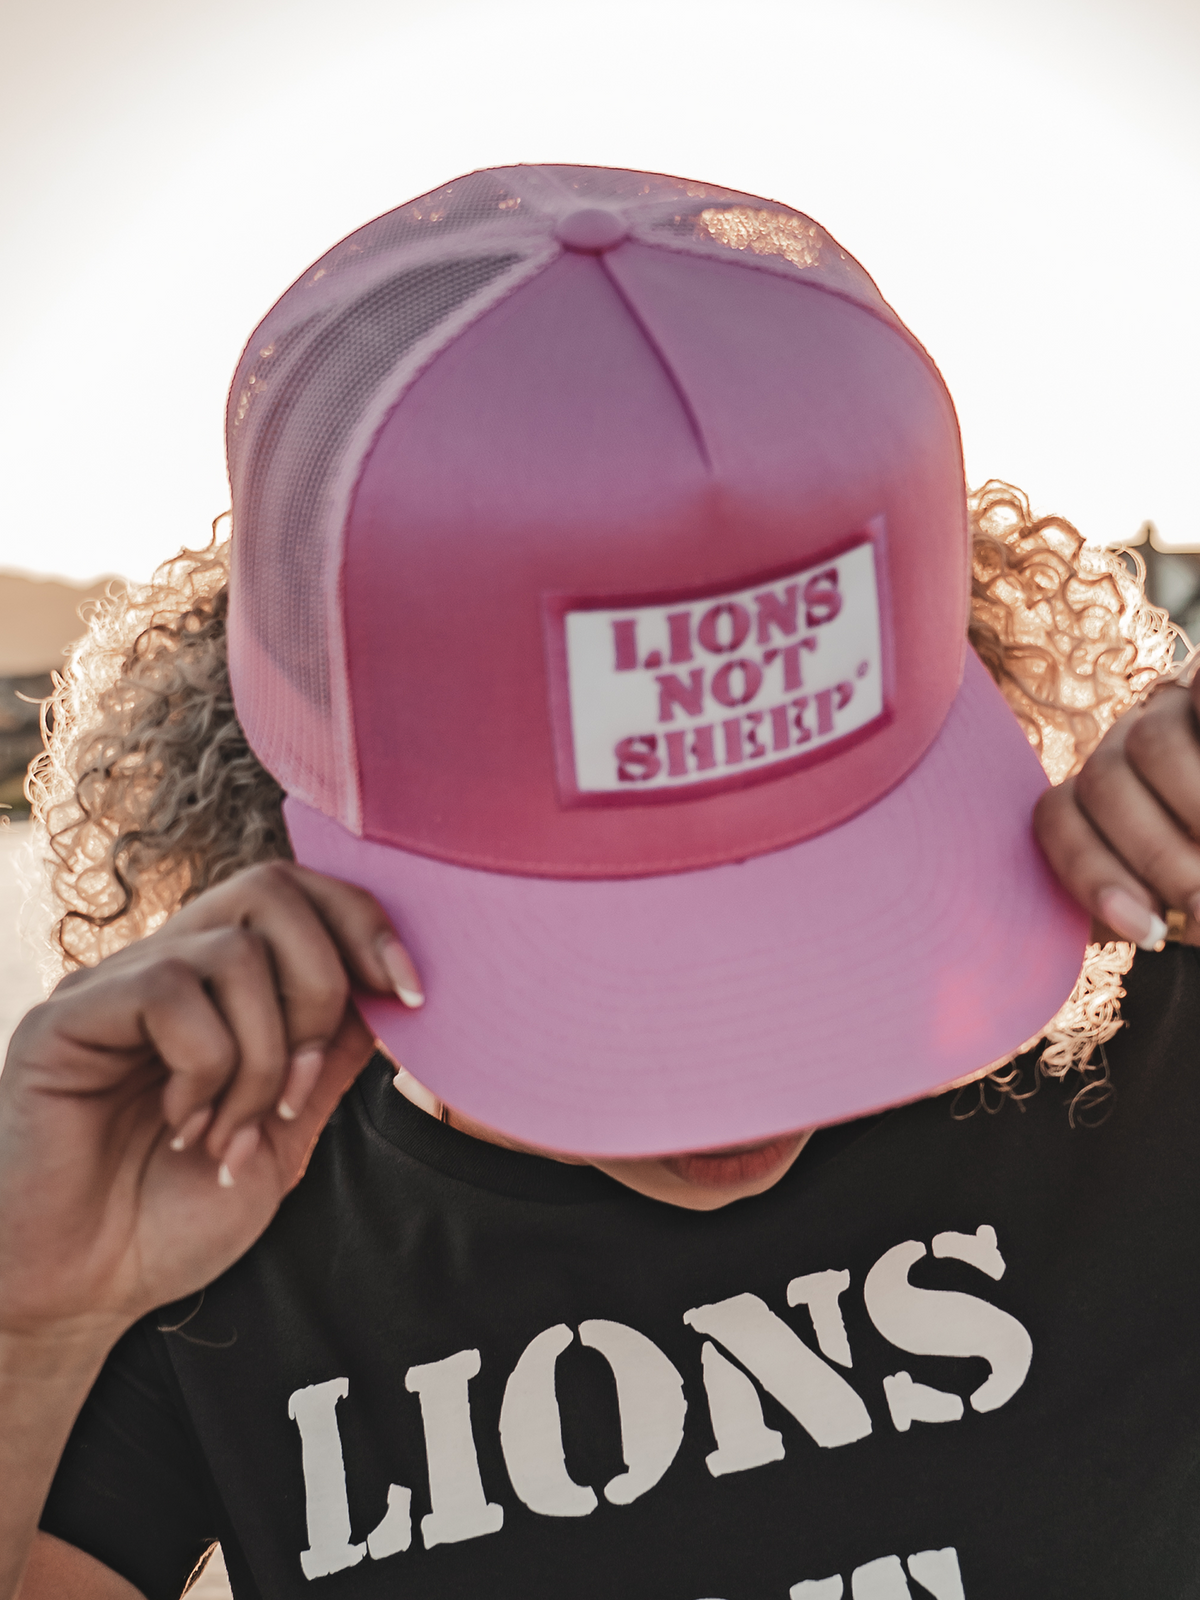 Lions Not Sheep OG Hat (Pink / White) - Lions Not Sheep ®